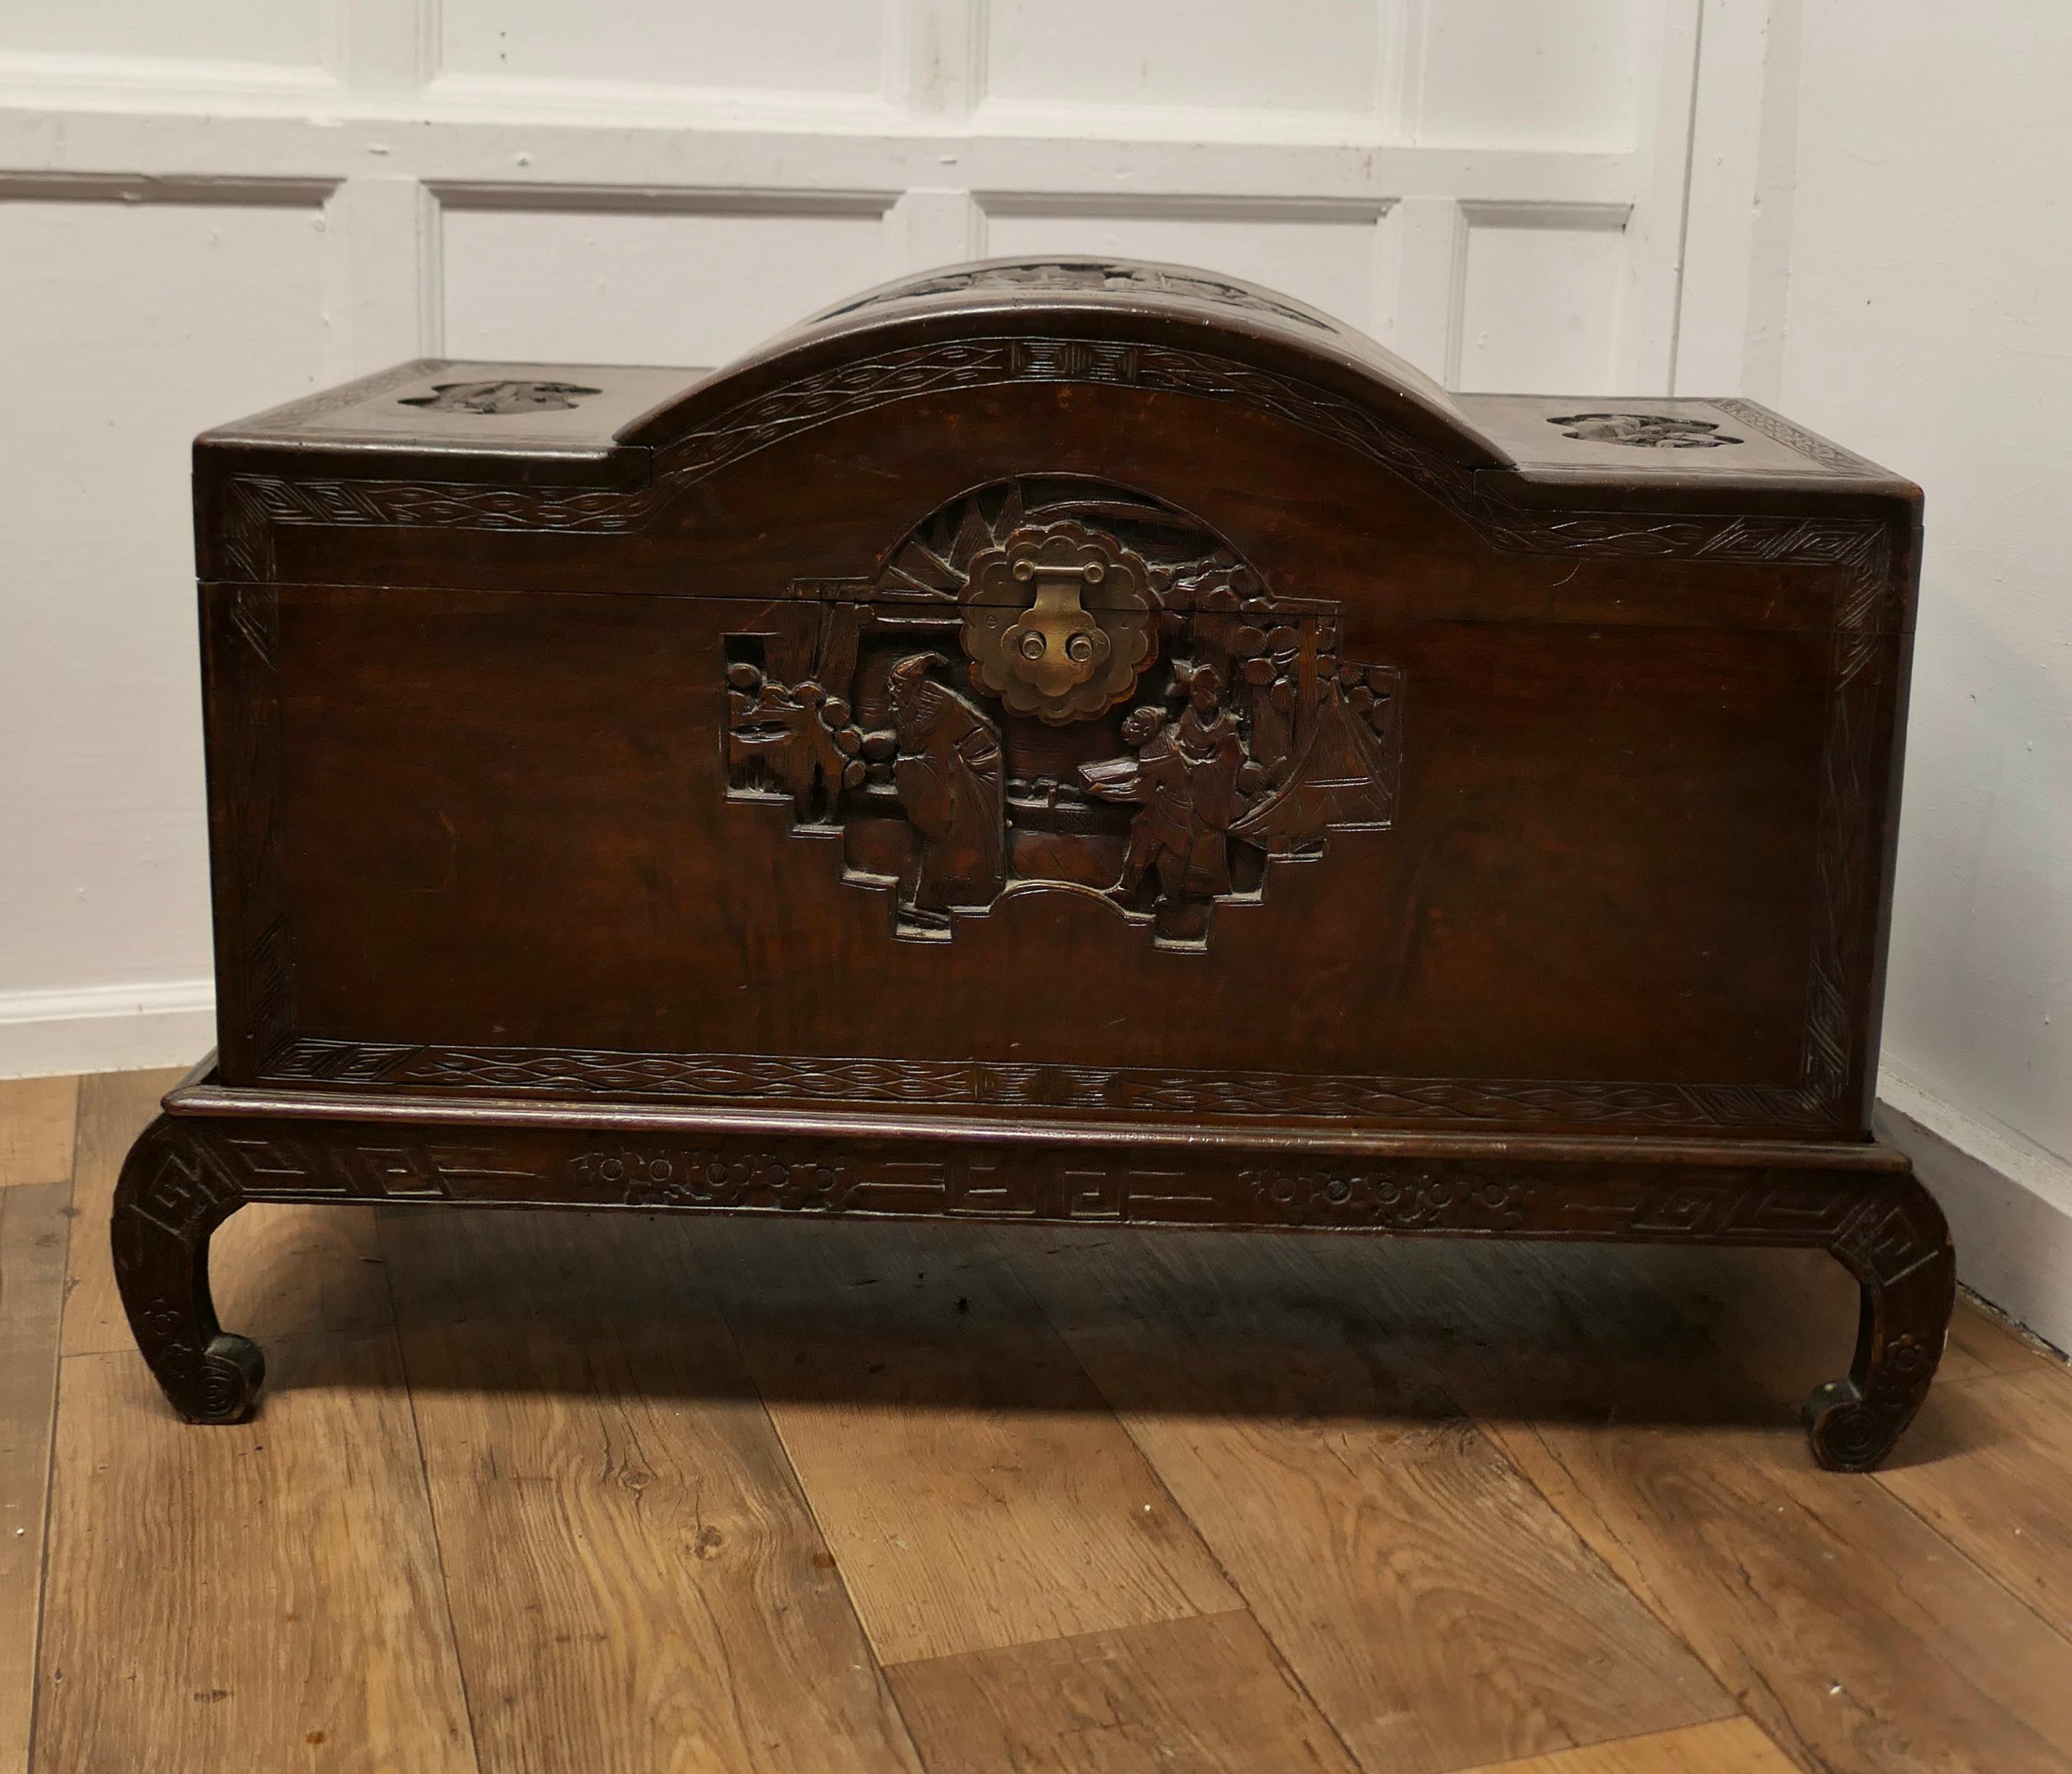 Art Deco Oriental Carved Camphor Wood Chest

This Beautiful Carved Chest is made from Camphor Wood, for those of you who do not know camphor wood it is a hard wood which lends itself very well to carving.
However the main reason for using camphor